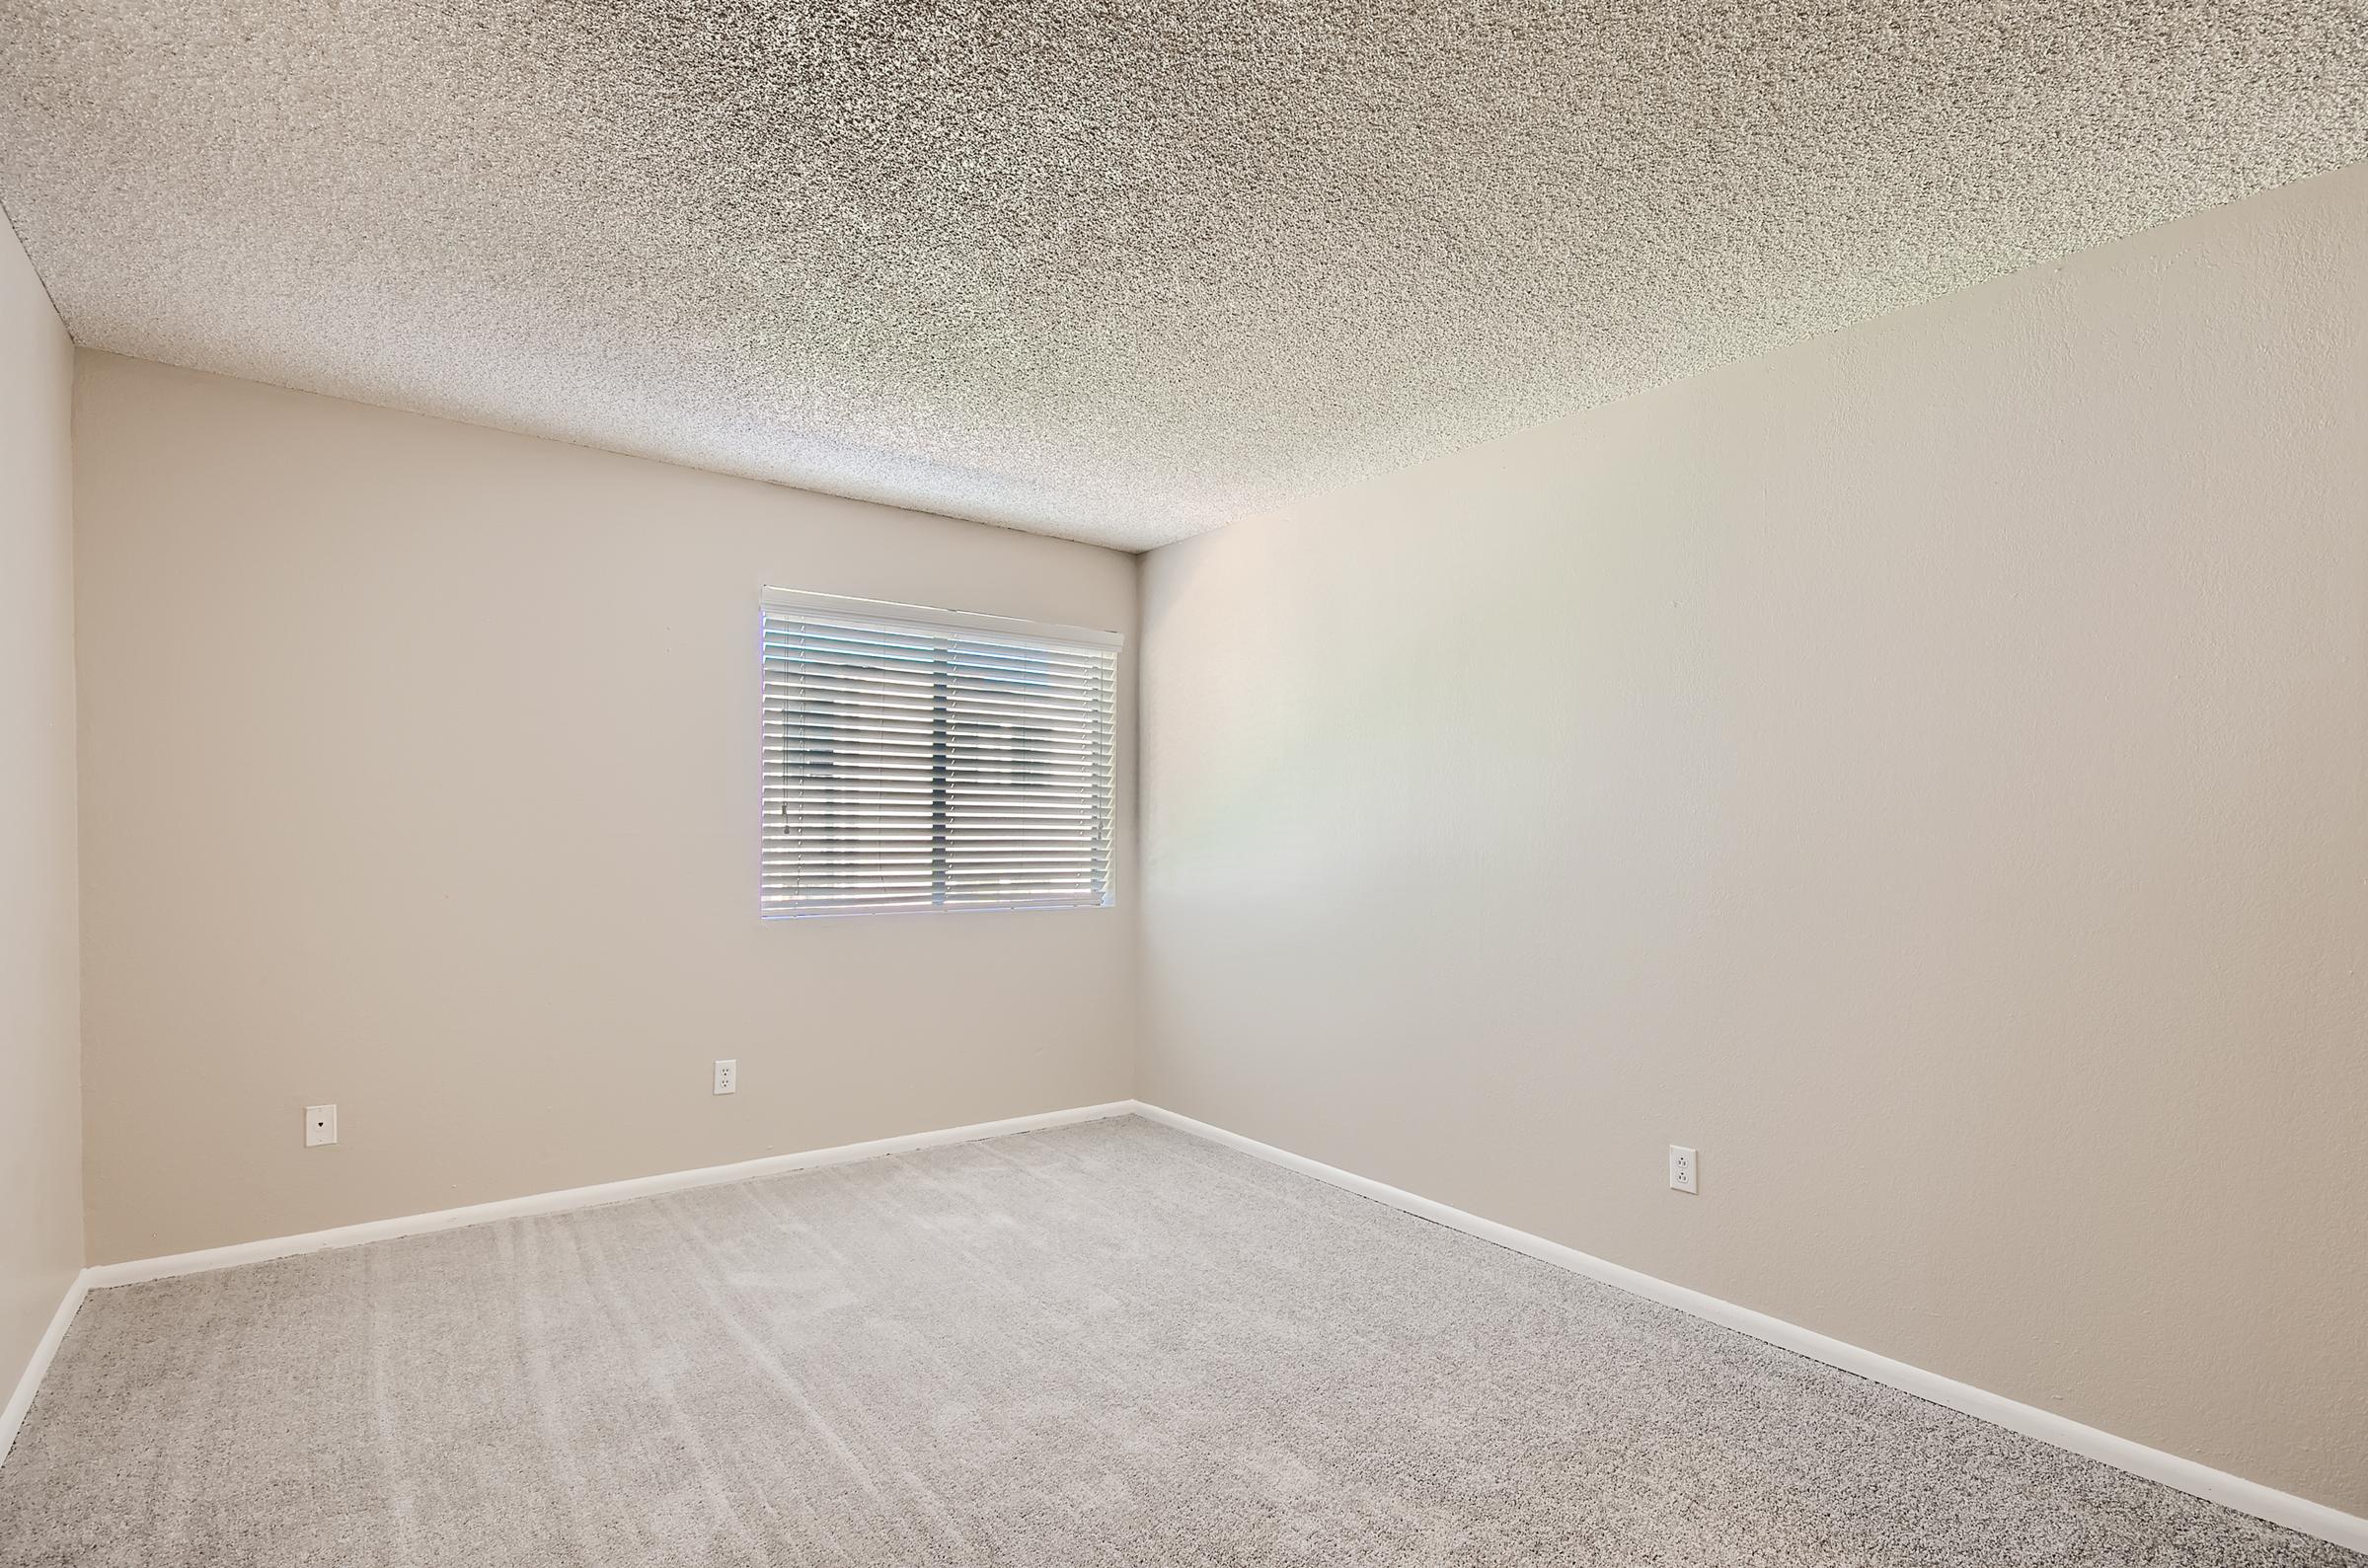 A carpeted bedroom with a window at Rise on McClintock in Tempe, AZ.